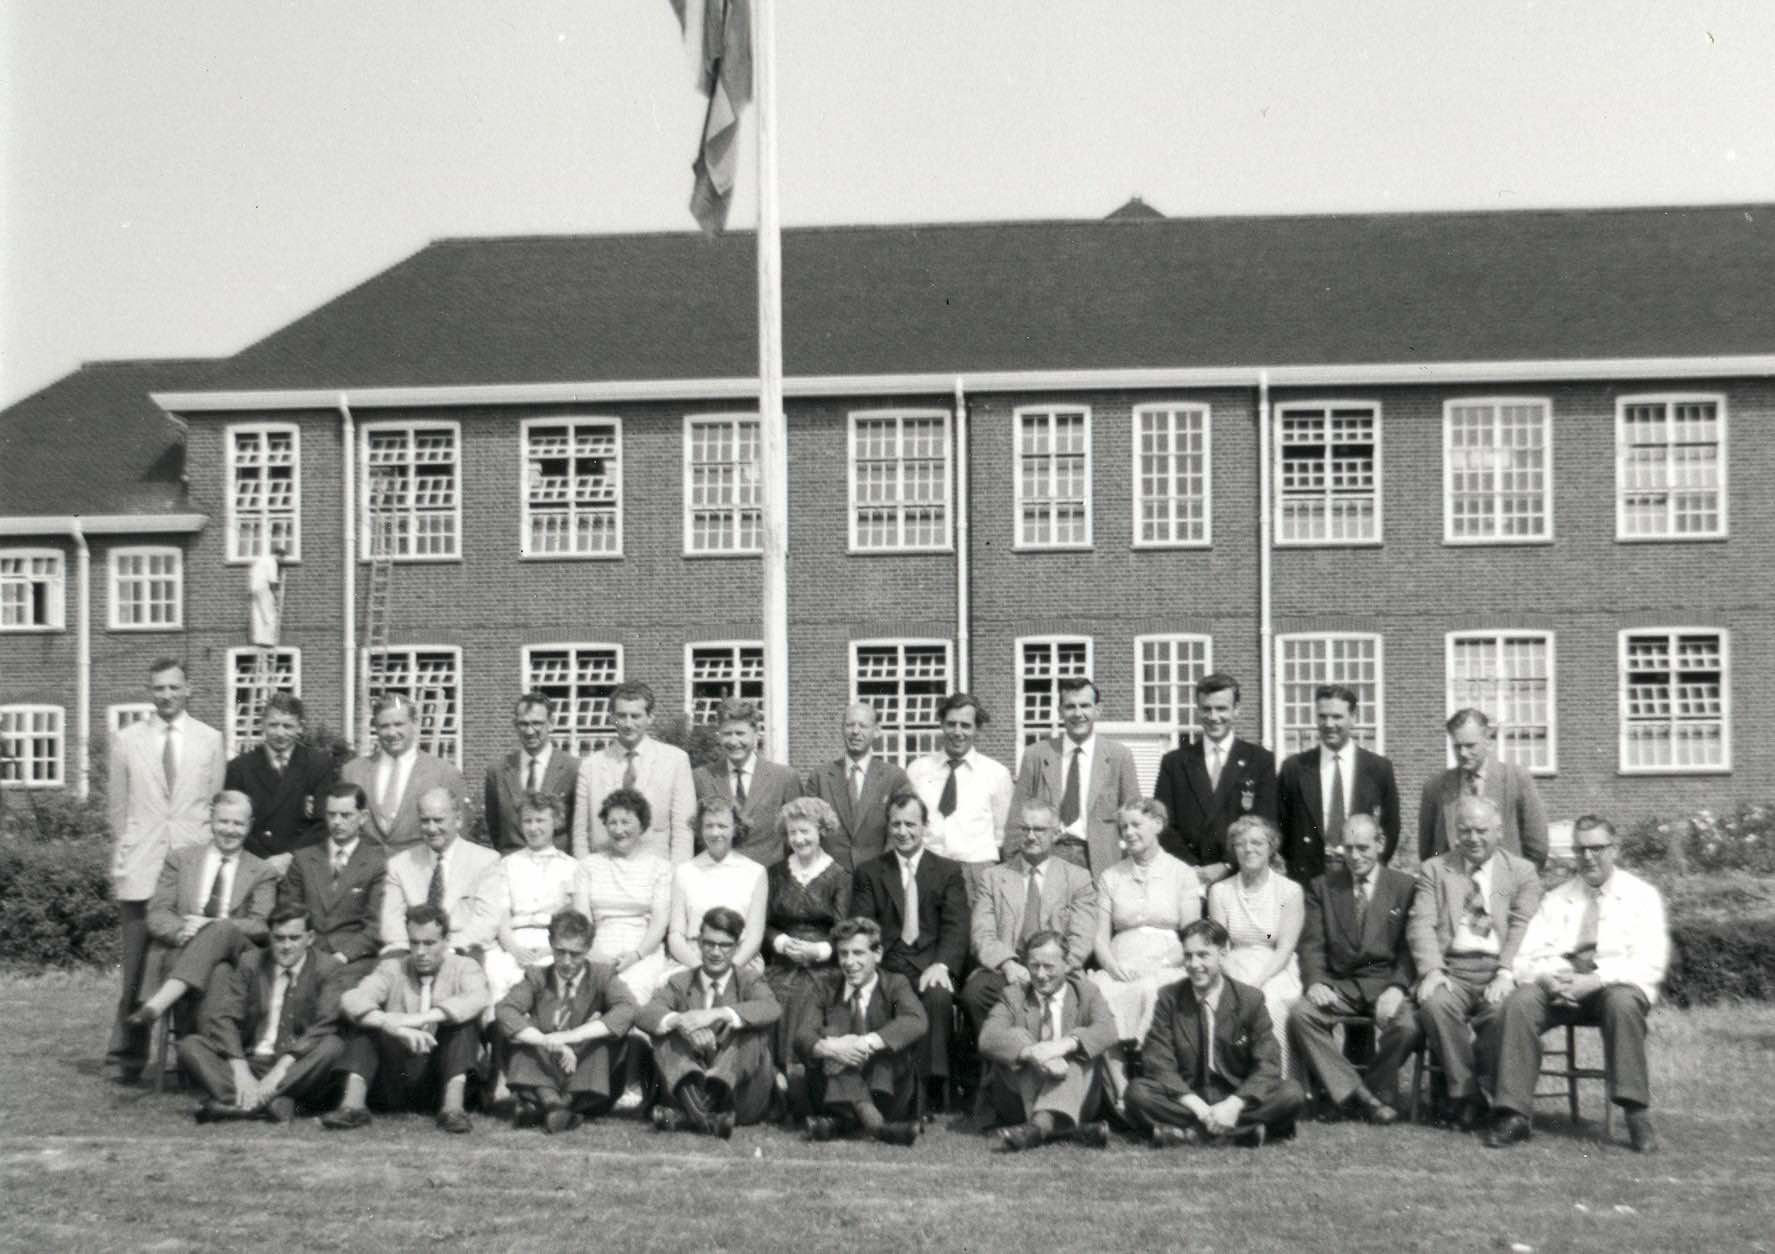 beaumont-school-has-kept-this-name-since-1938